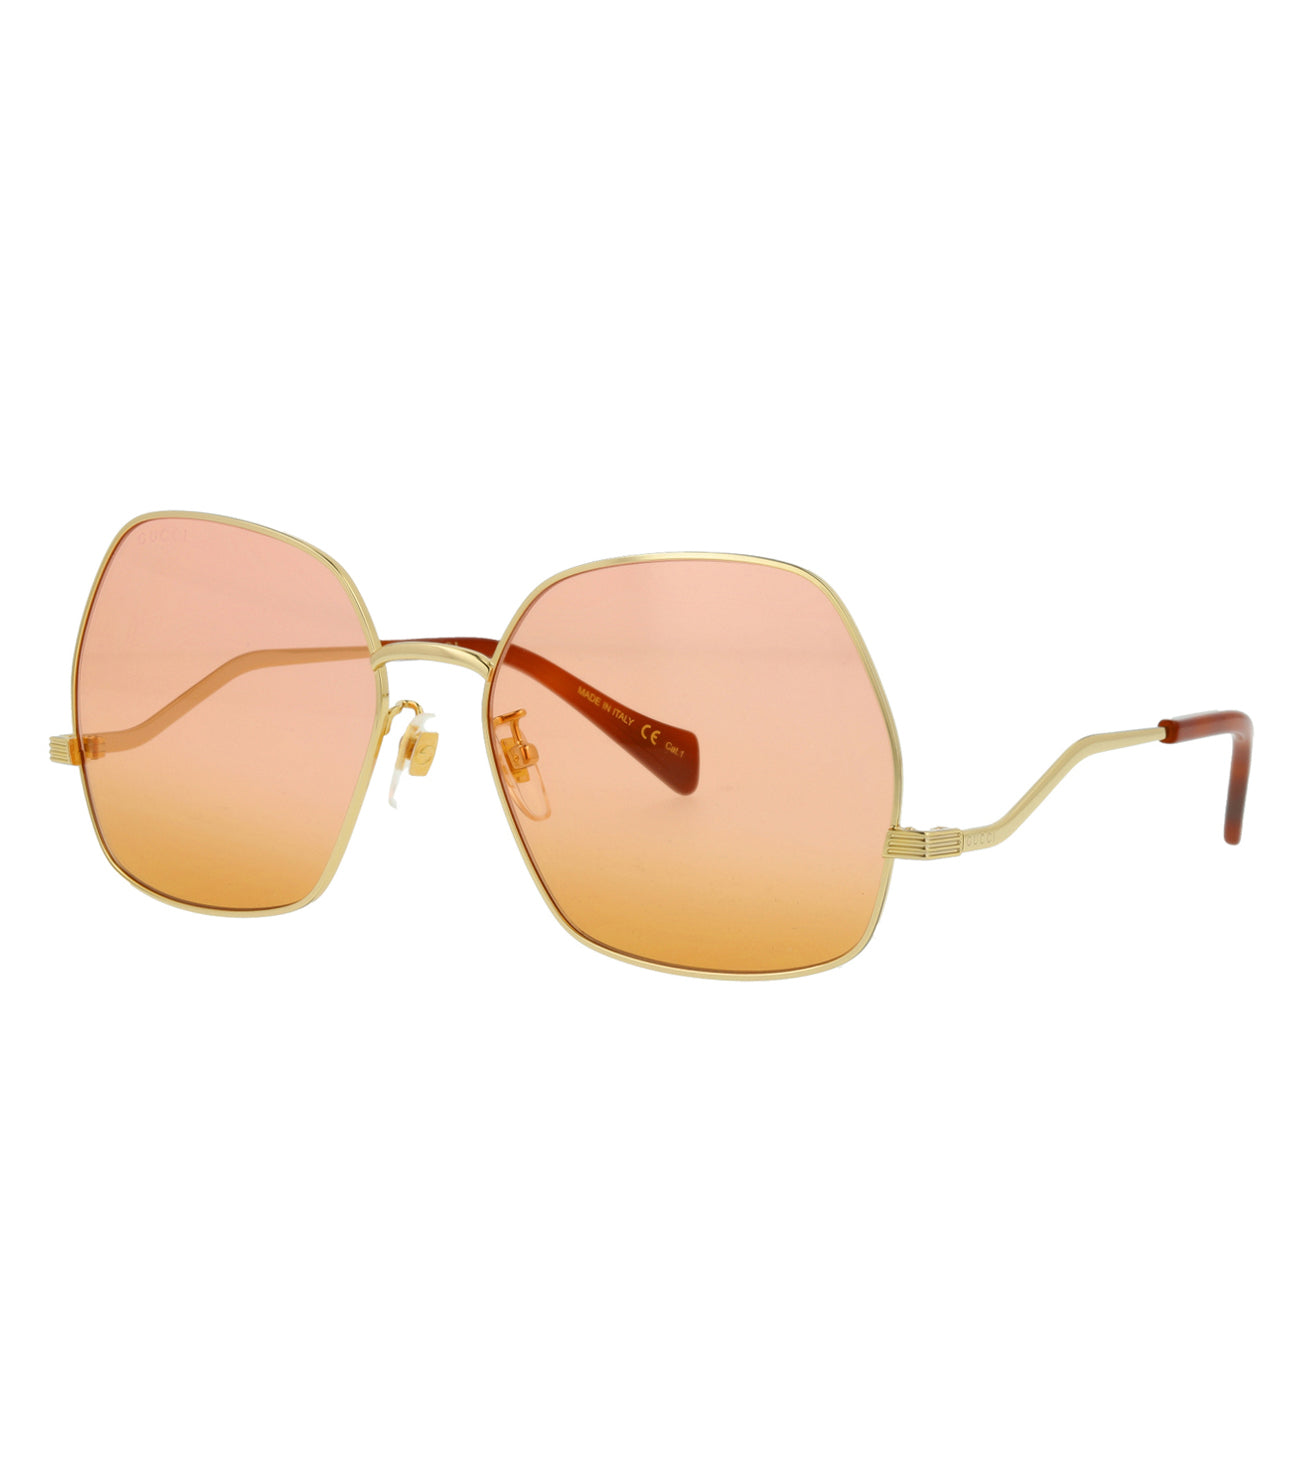 Gucci Women's Pink & Brown Butterfly Sunglasses